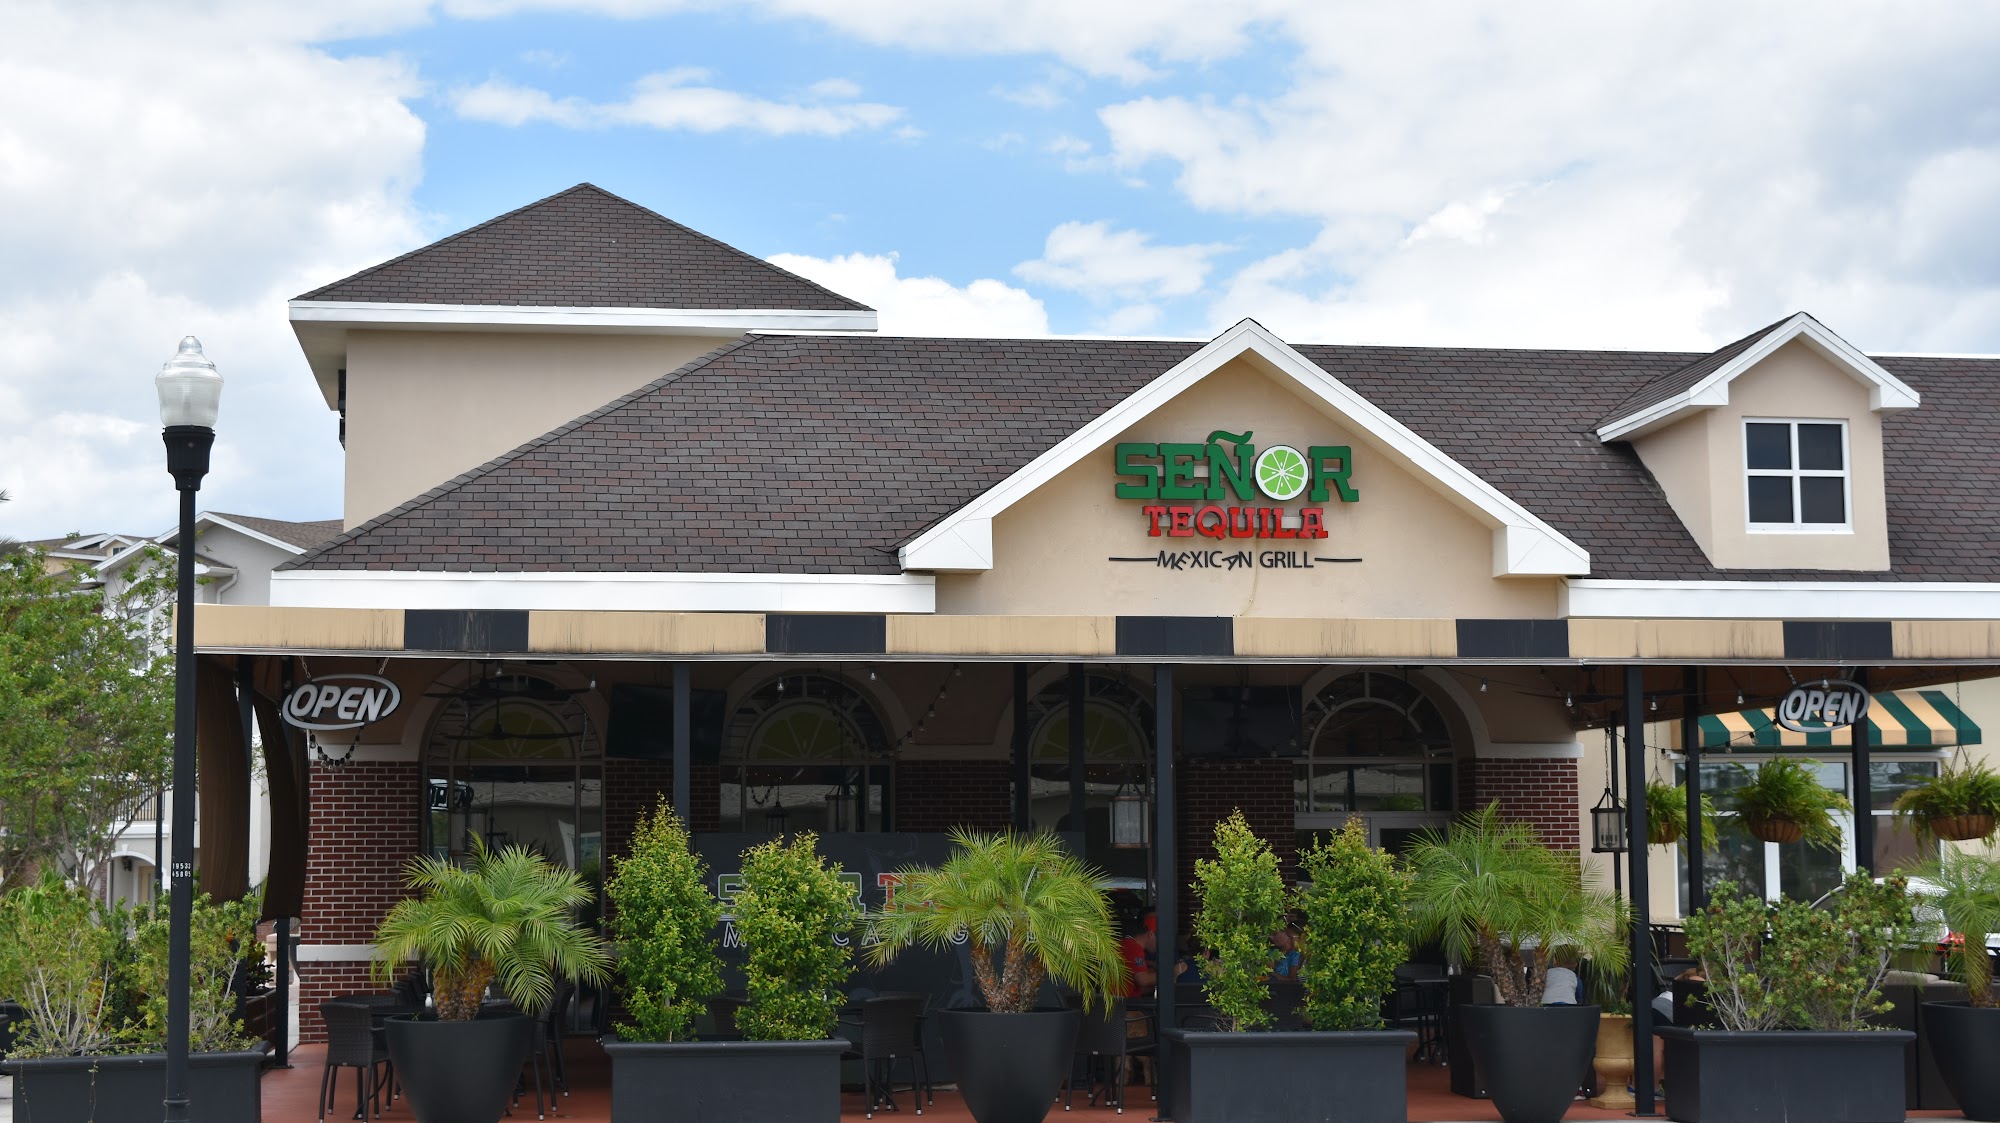 Señor Tequila Mexican Grill - Westchase